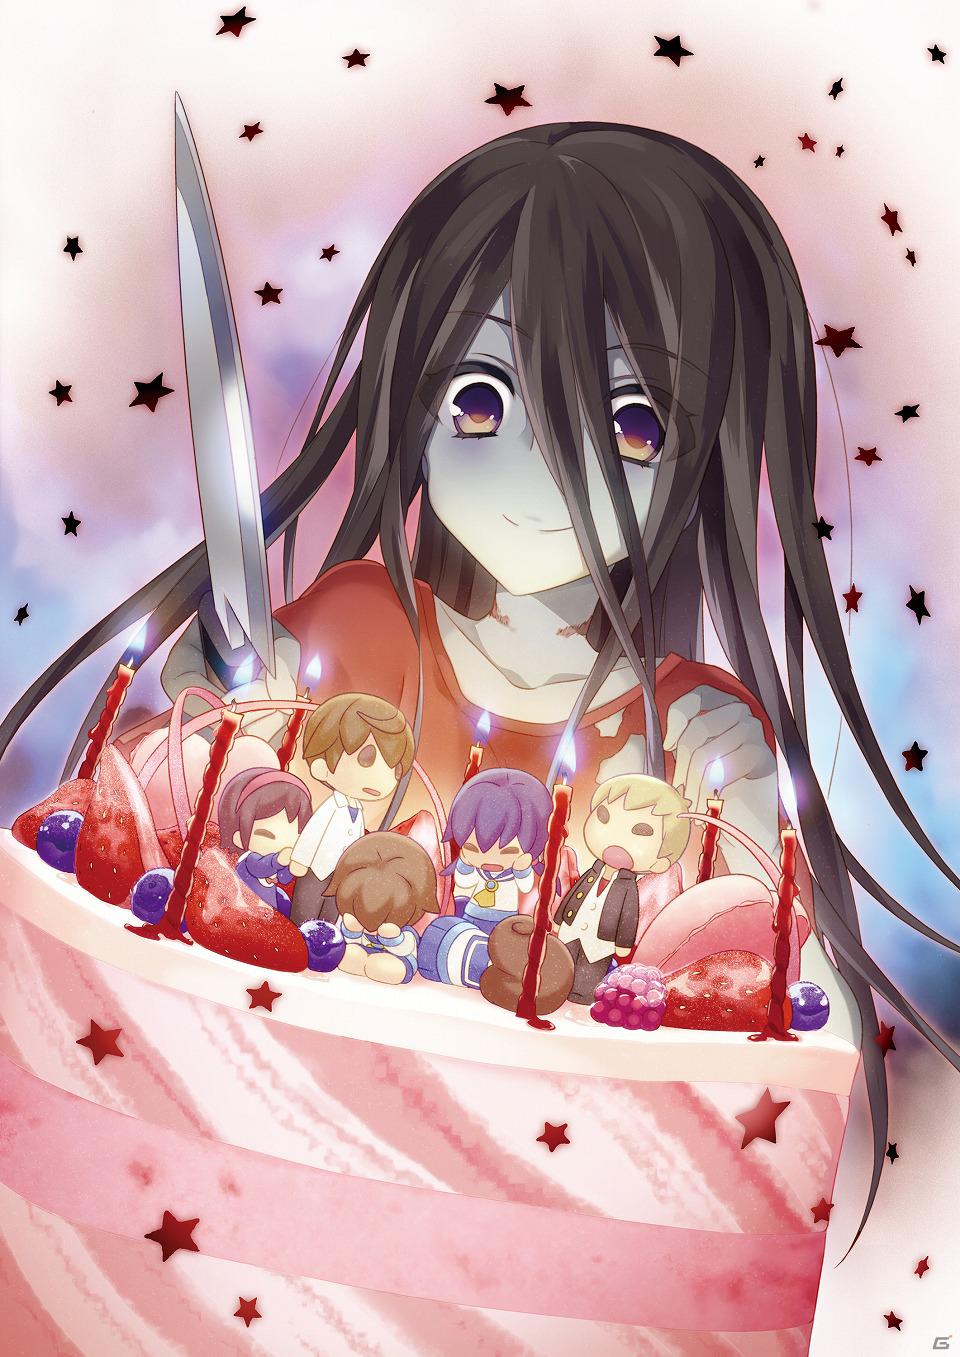 Corpse Party: Missing Footage | Soundeffects Wiki | Fandom